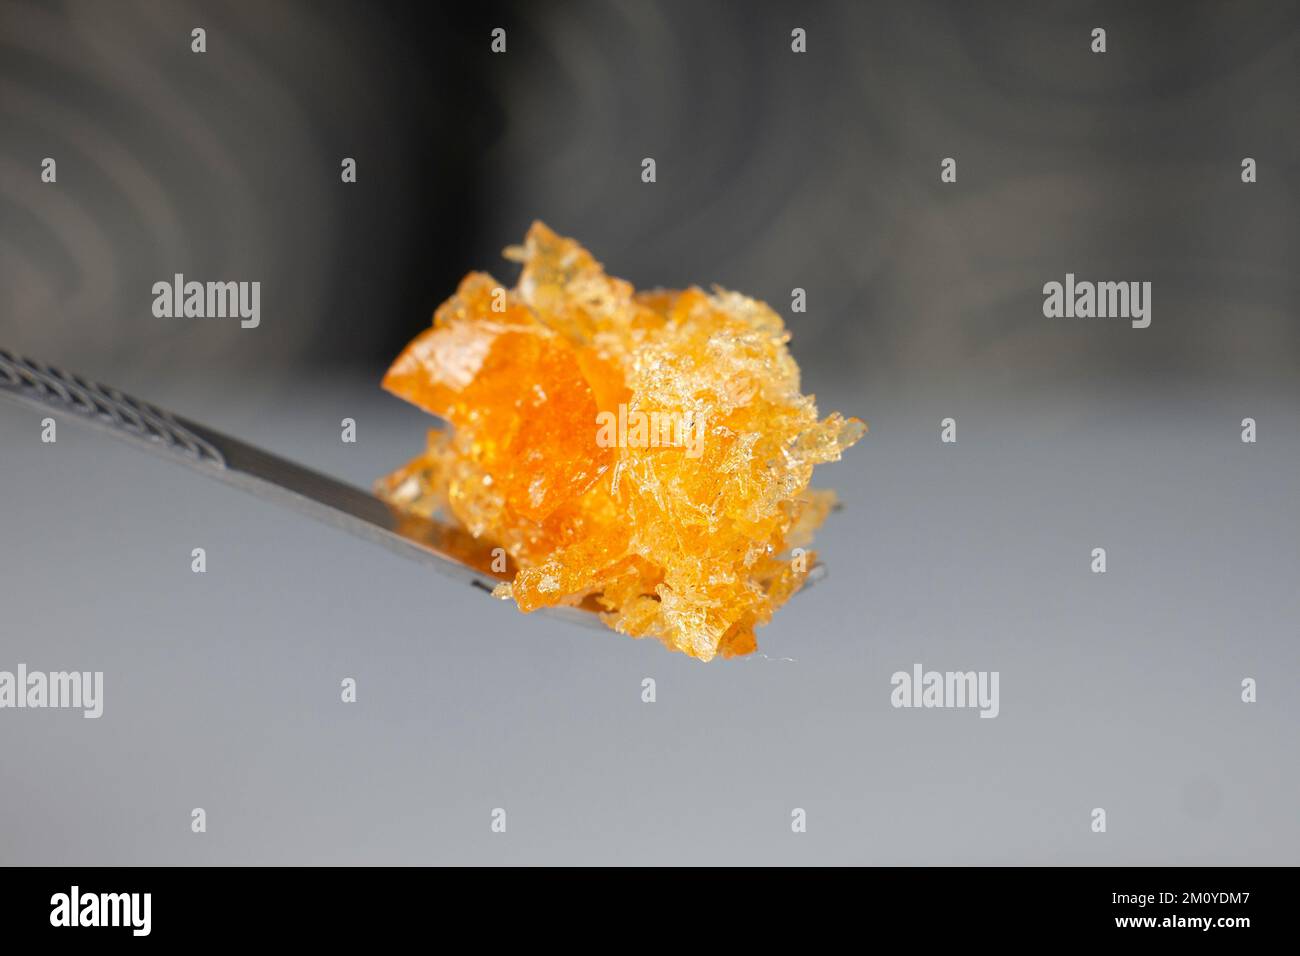 amber yellow cannabis wax concentrate dripping from the dabbing tool closeup. Stock Photo